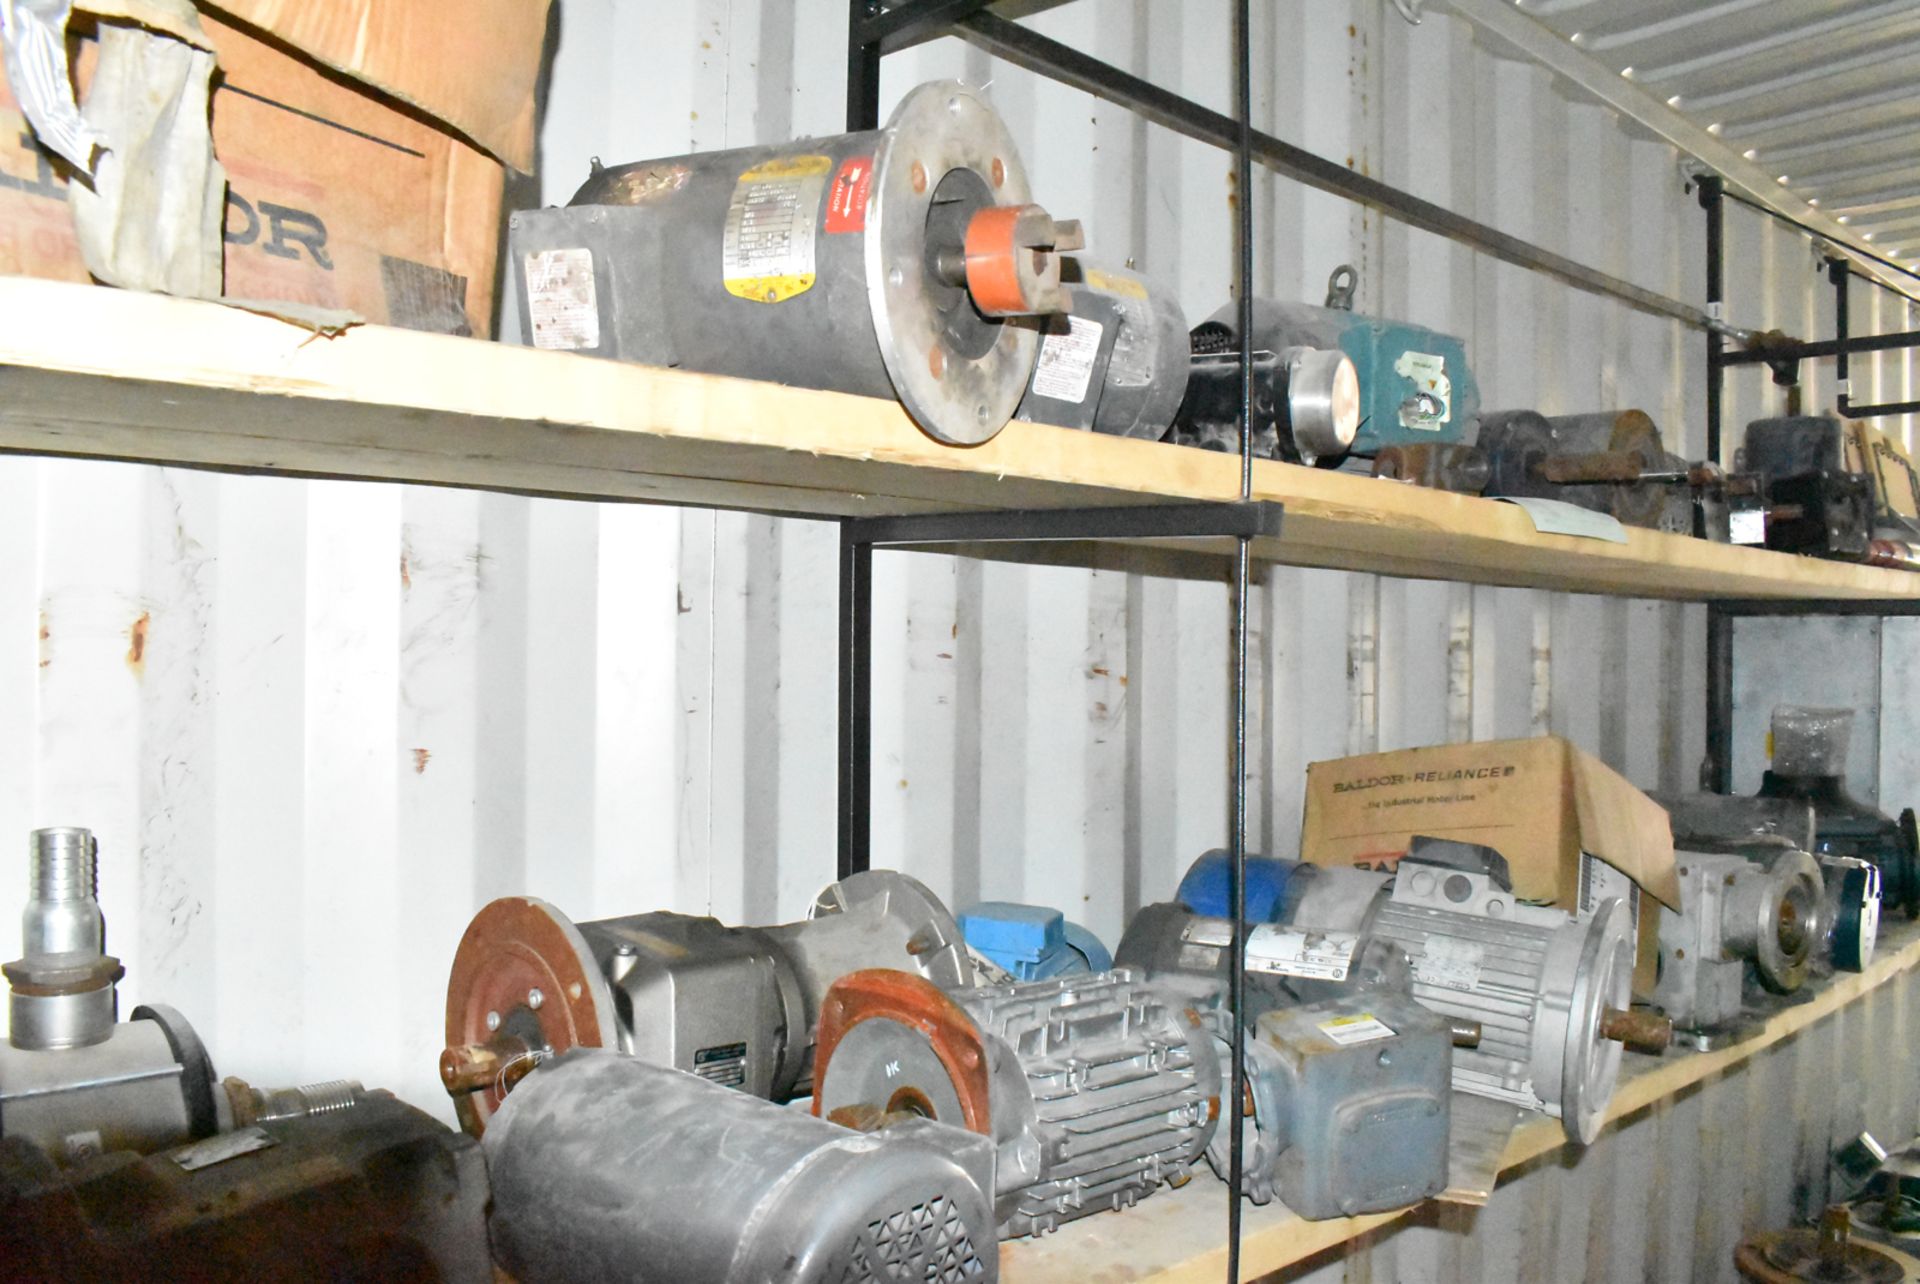 LOT/ CONTENTS OF SEA CONTAINER - SPARE MOTORS, GEARBOXES, PYROTEK DIE CASTING SUPPLIES, AIR TANK, - Image 14 of 19